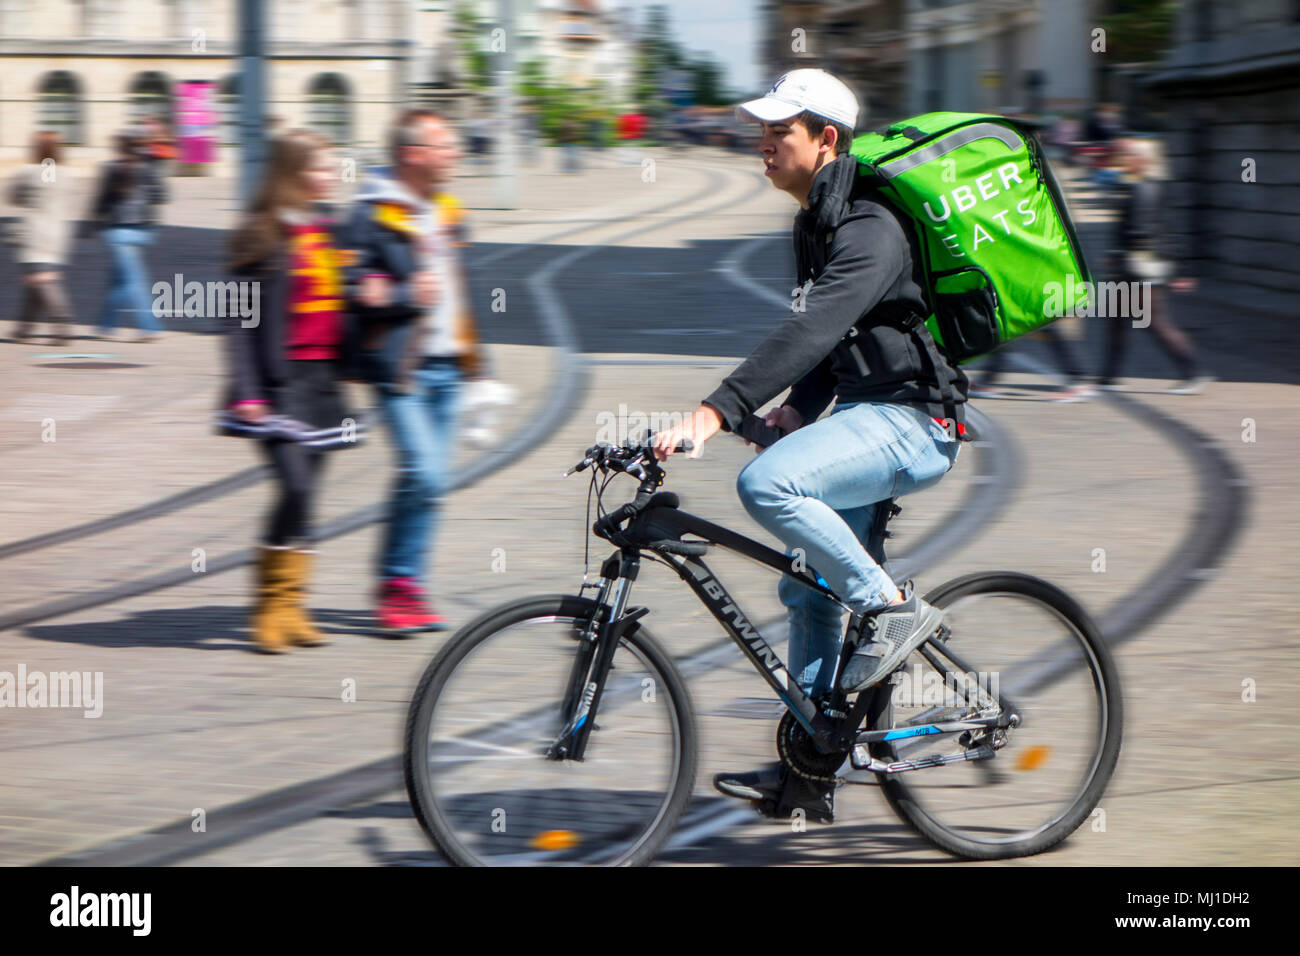 UberEATS / Uber Eats online meal ordering and delivery platform, bicycle courier delivering meals in the city center Stock Photo